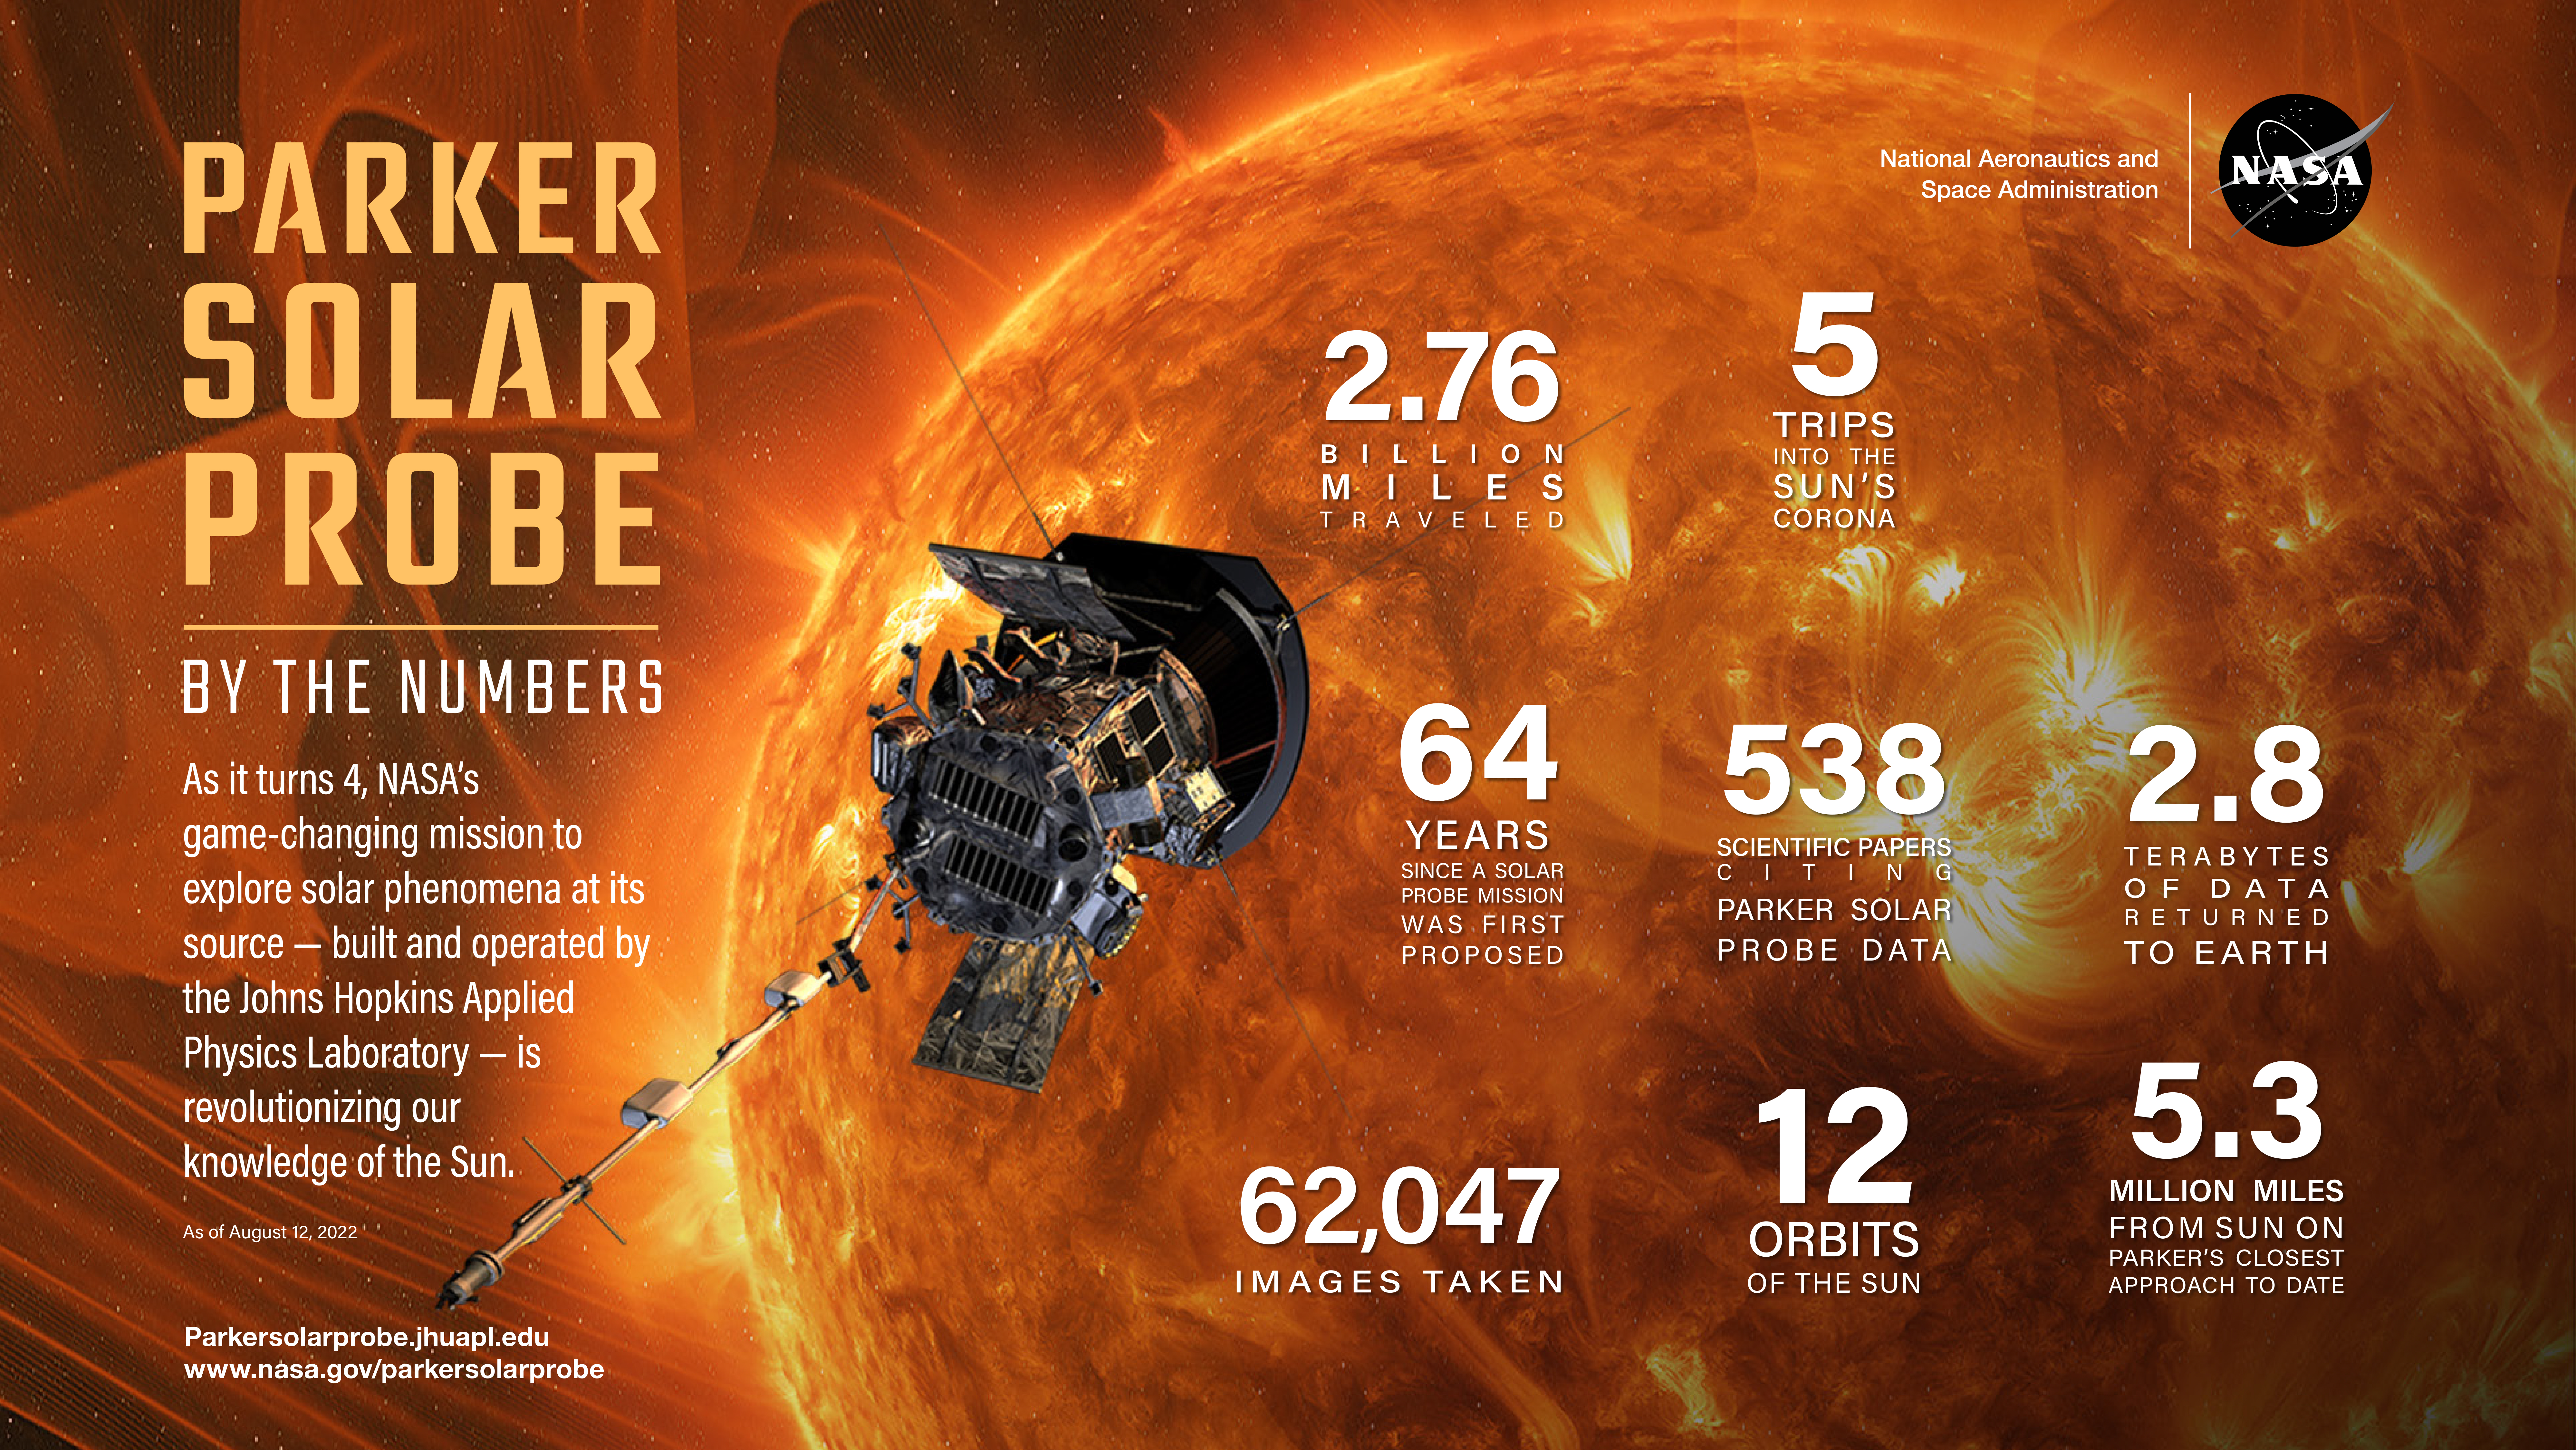 Parker Solar Probe by the numbers